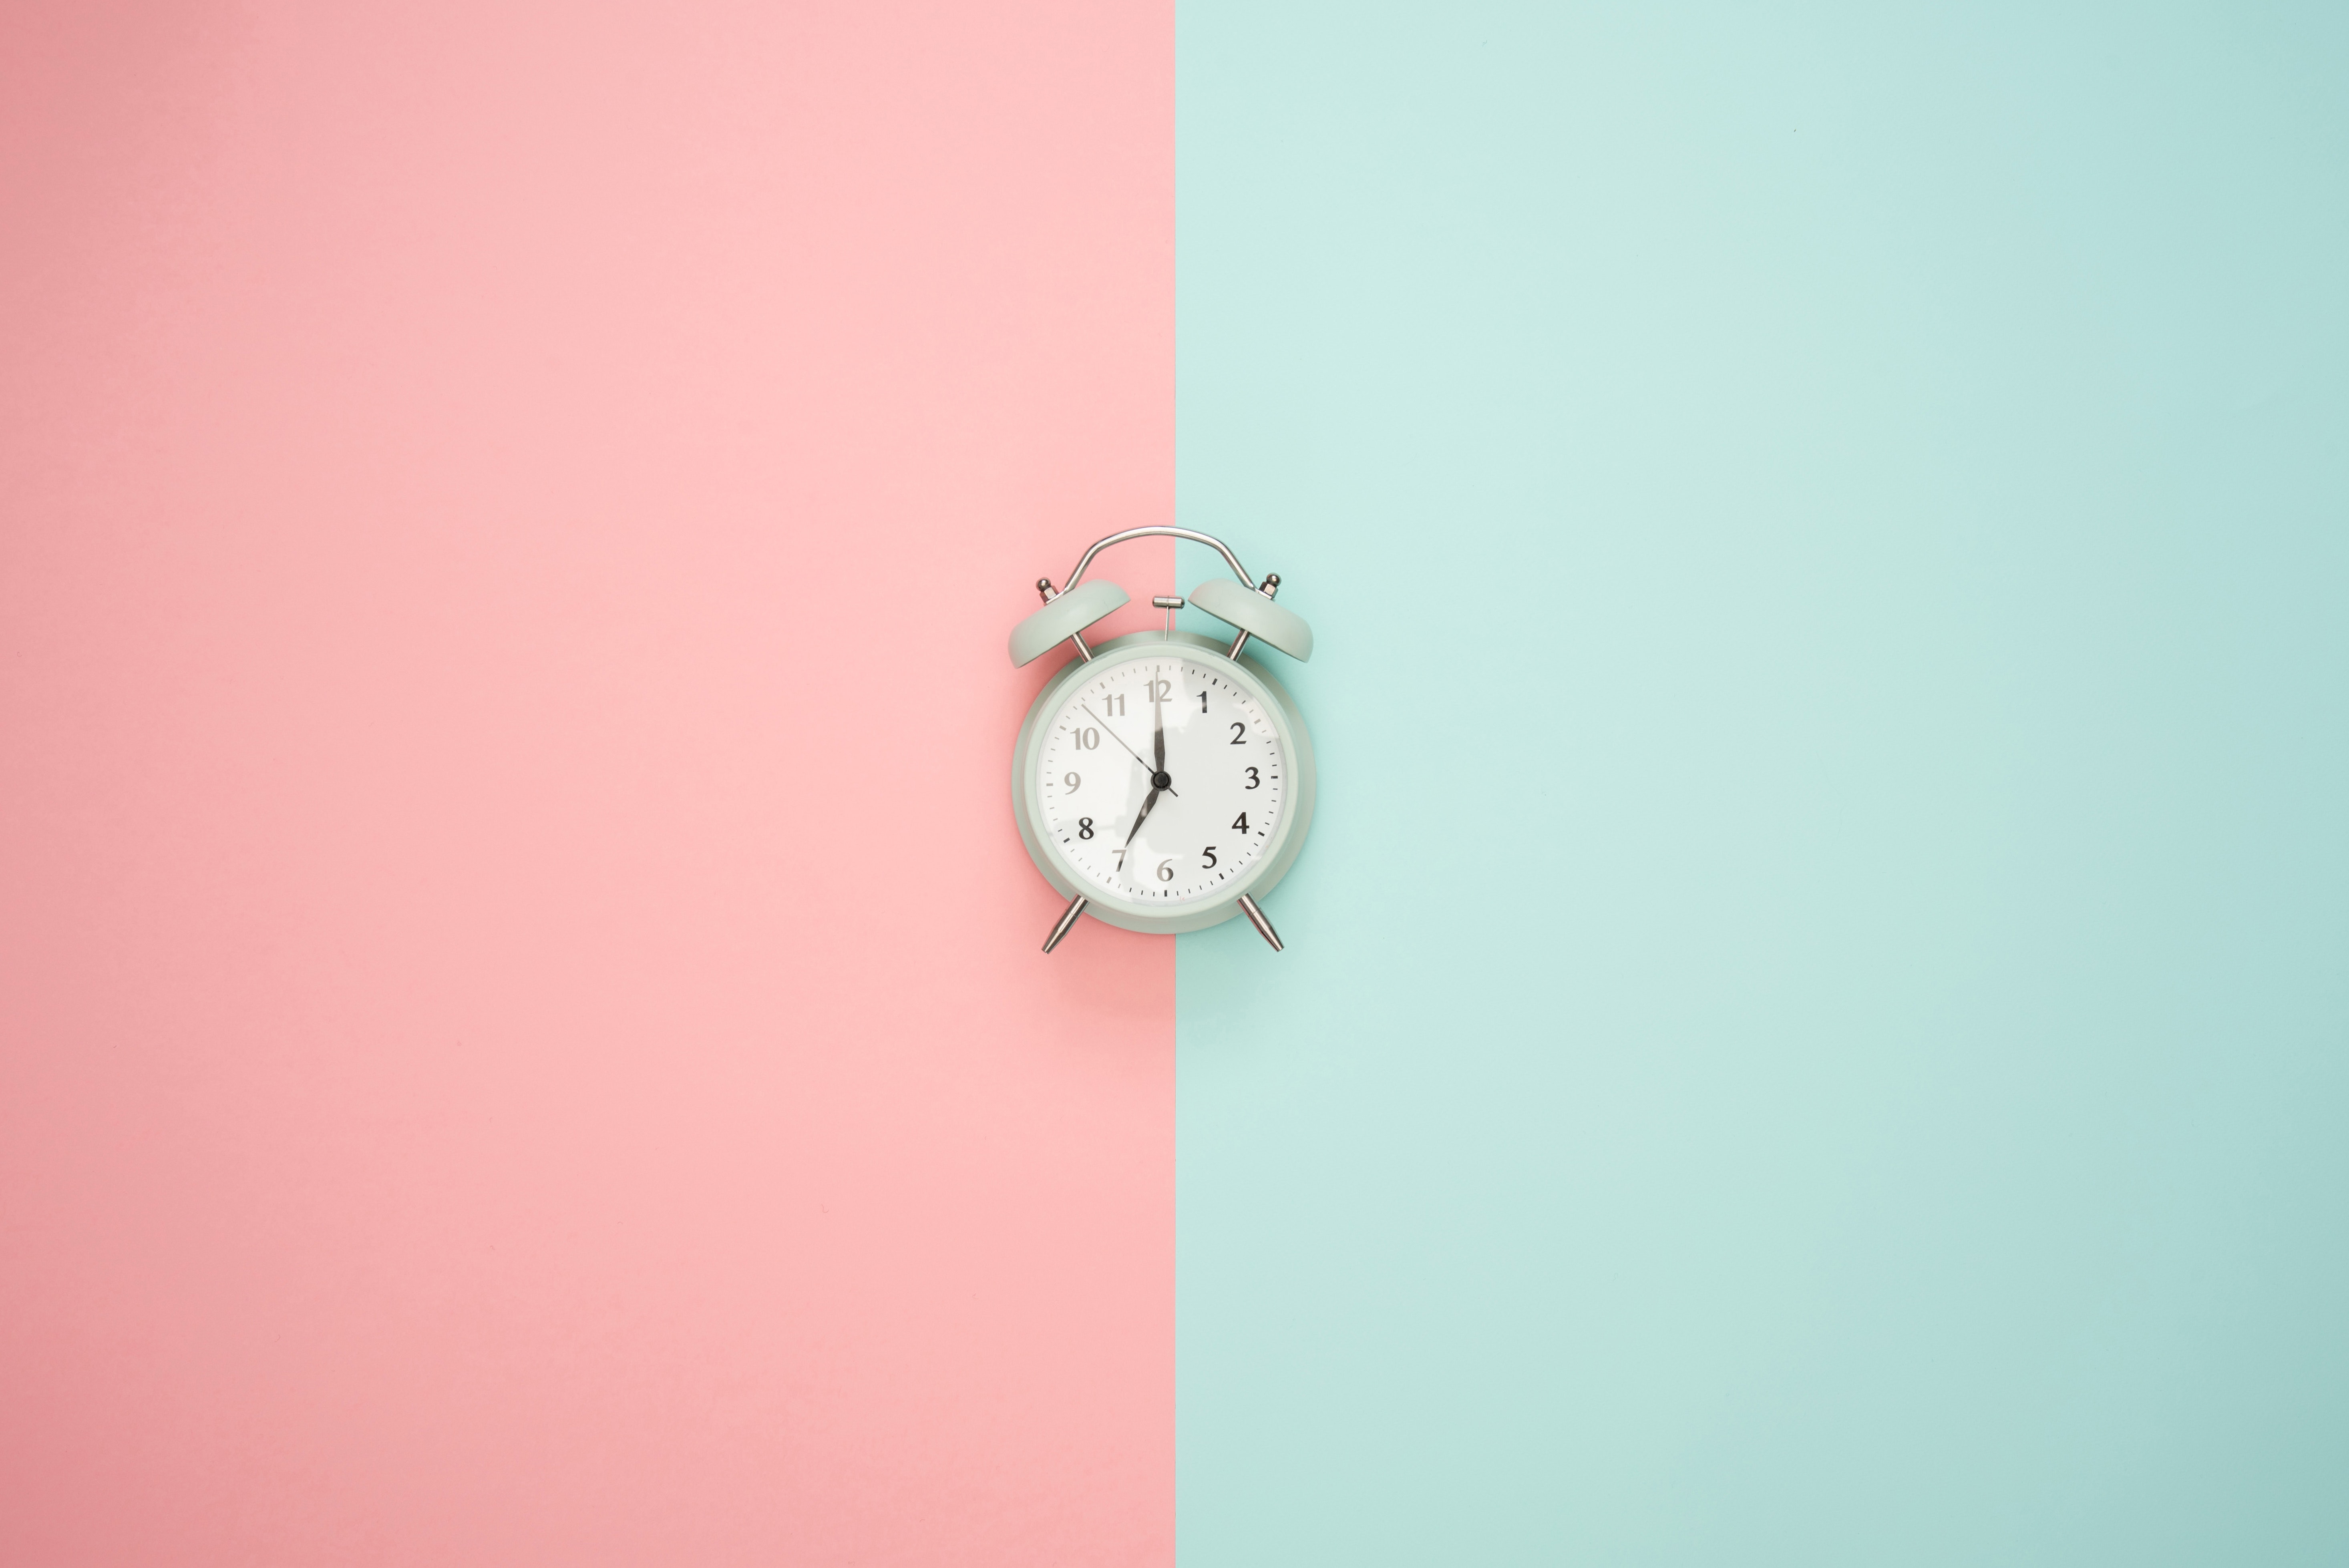 Old fashioned alarm clock against a pink and teal background